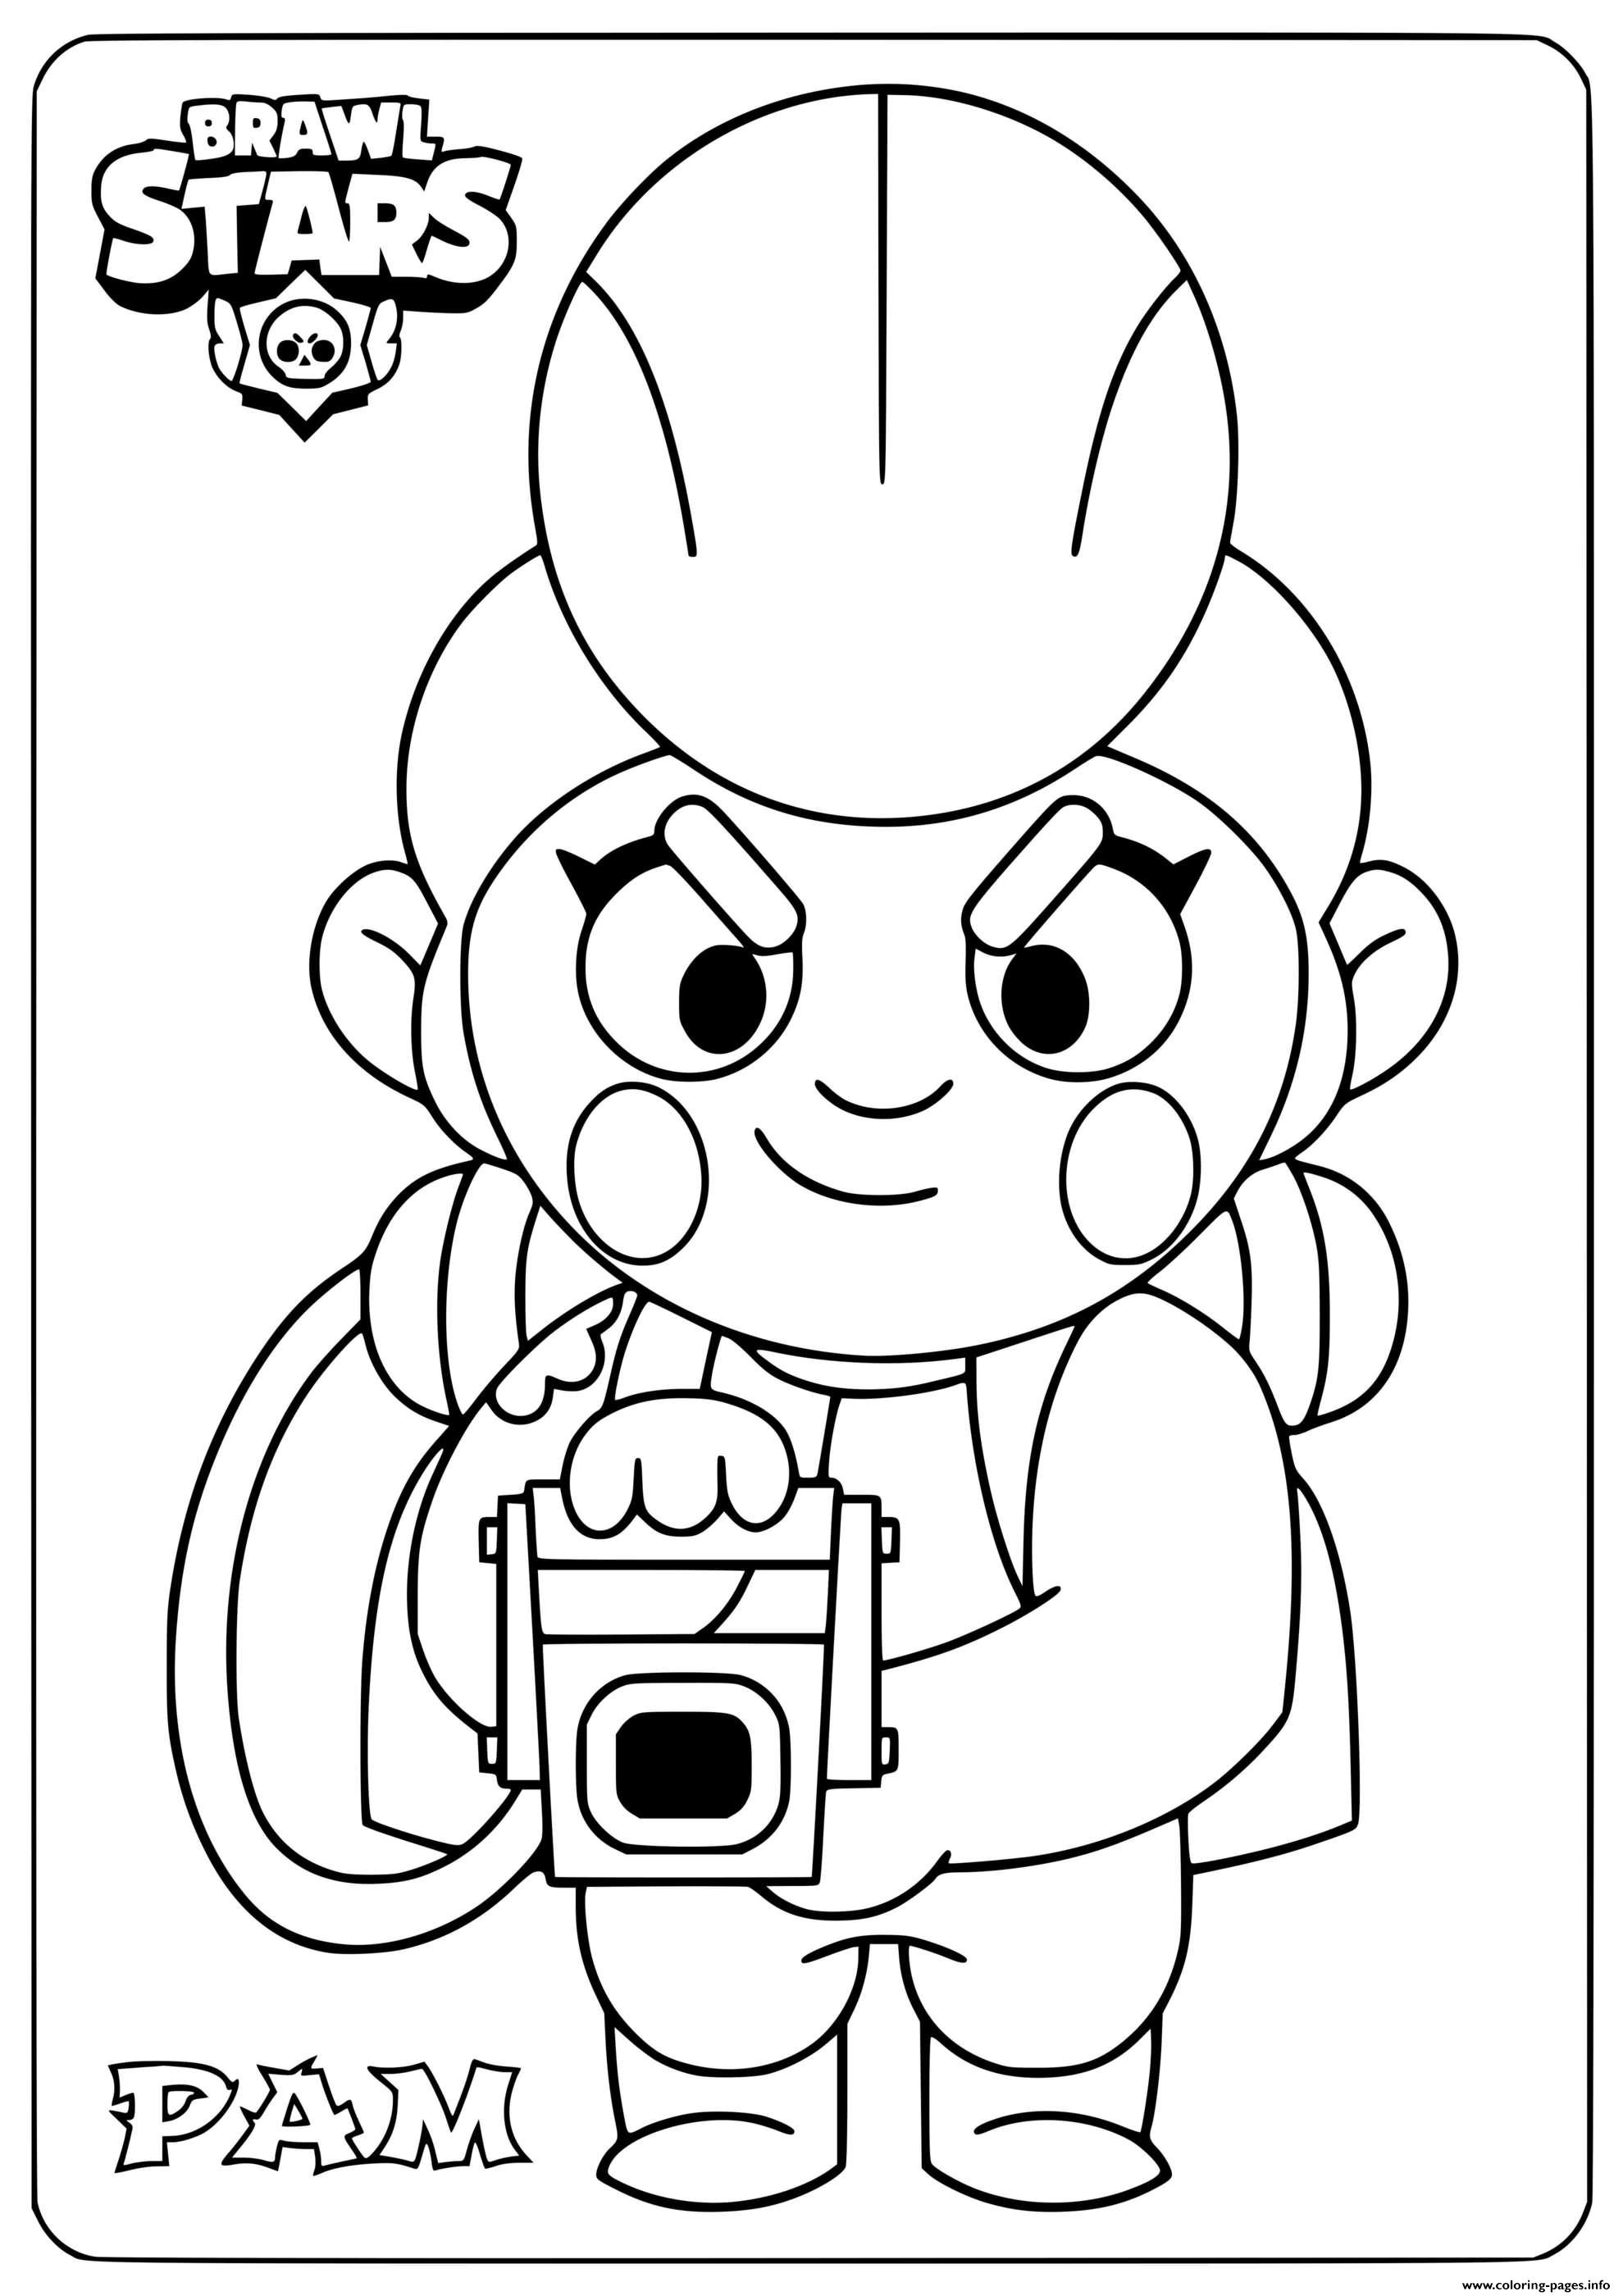 Brawl Stars Pam Coloring Pages Printable - brawl stars a colorier pam